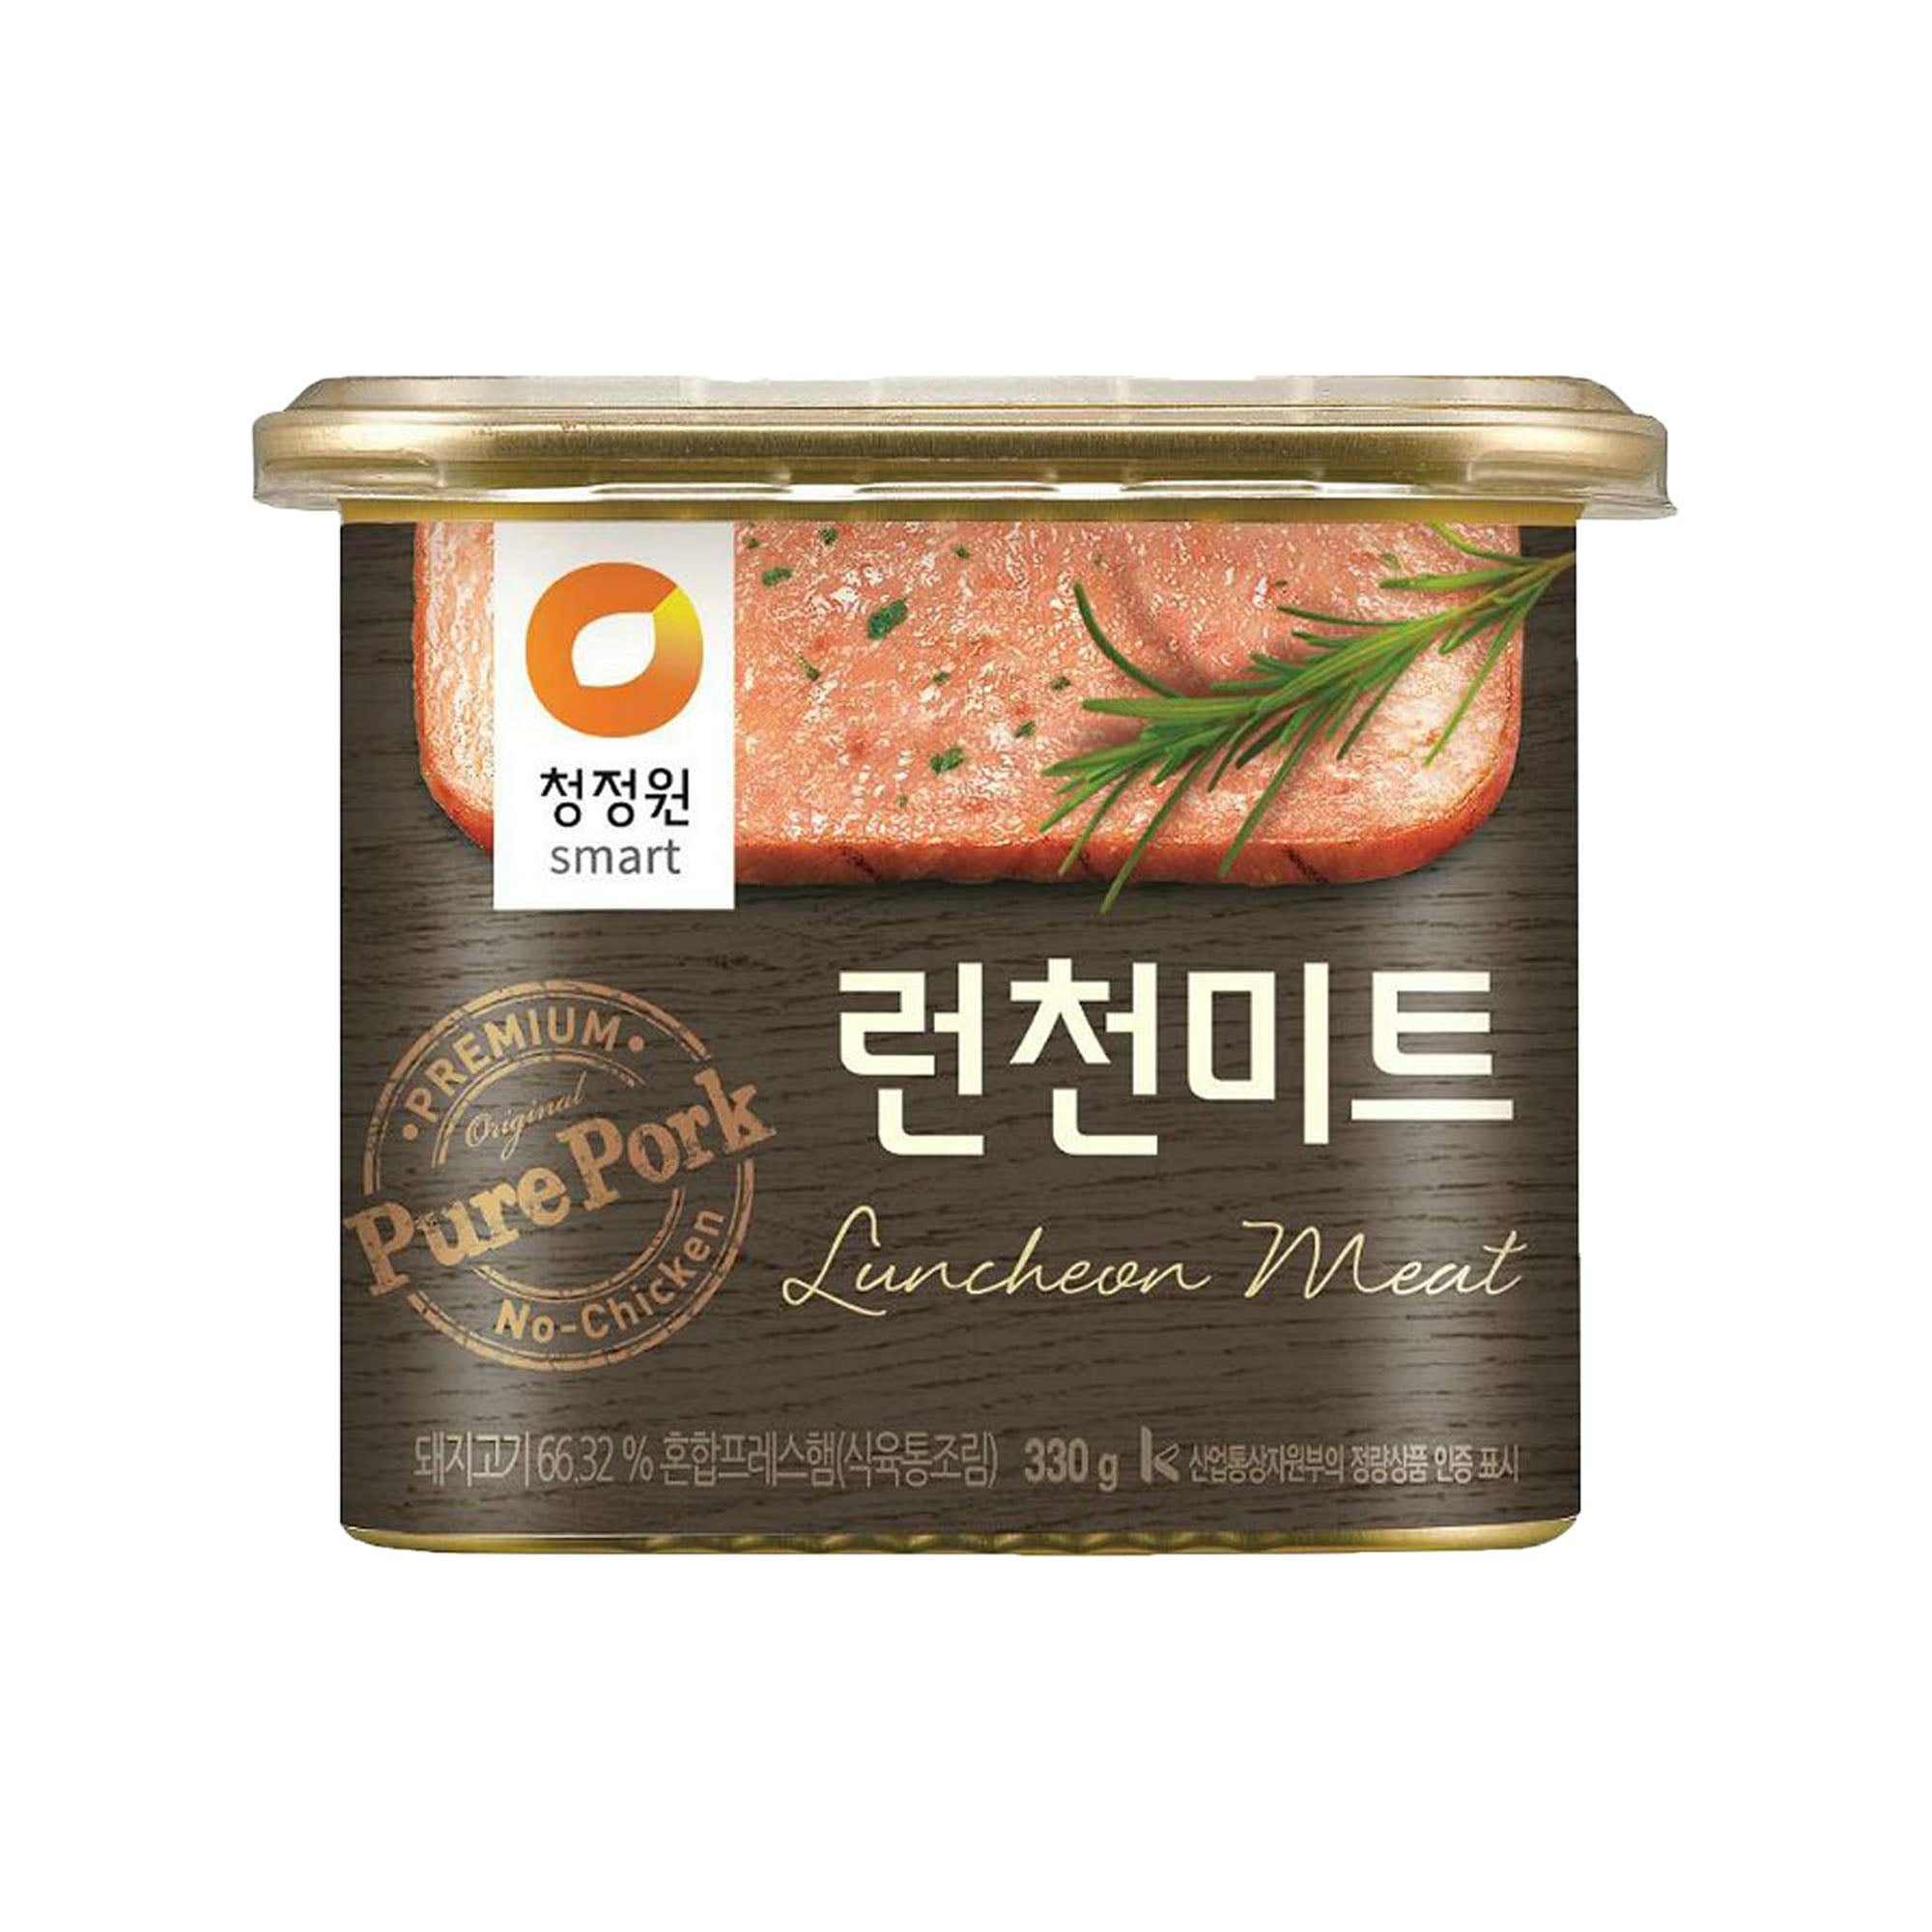 Luncheon Meat 런천미트